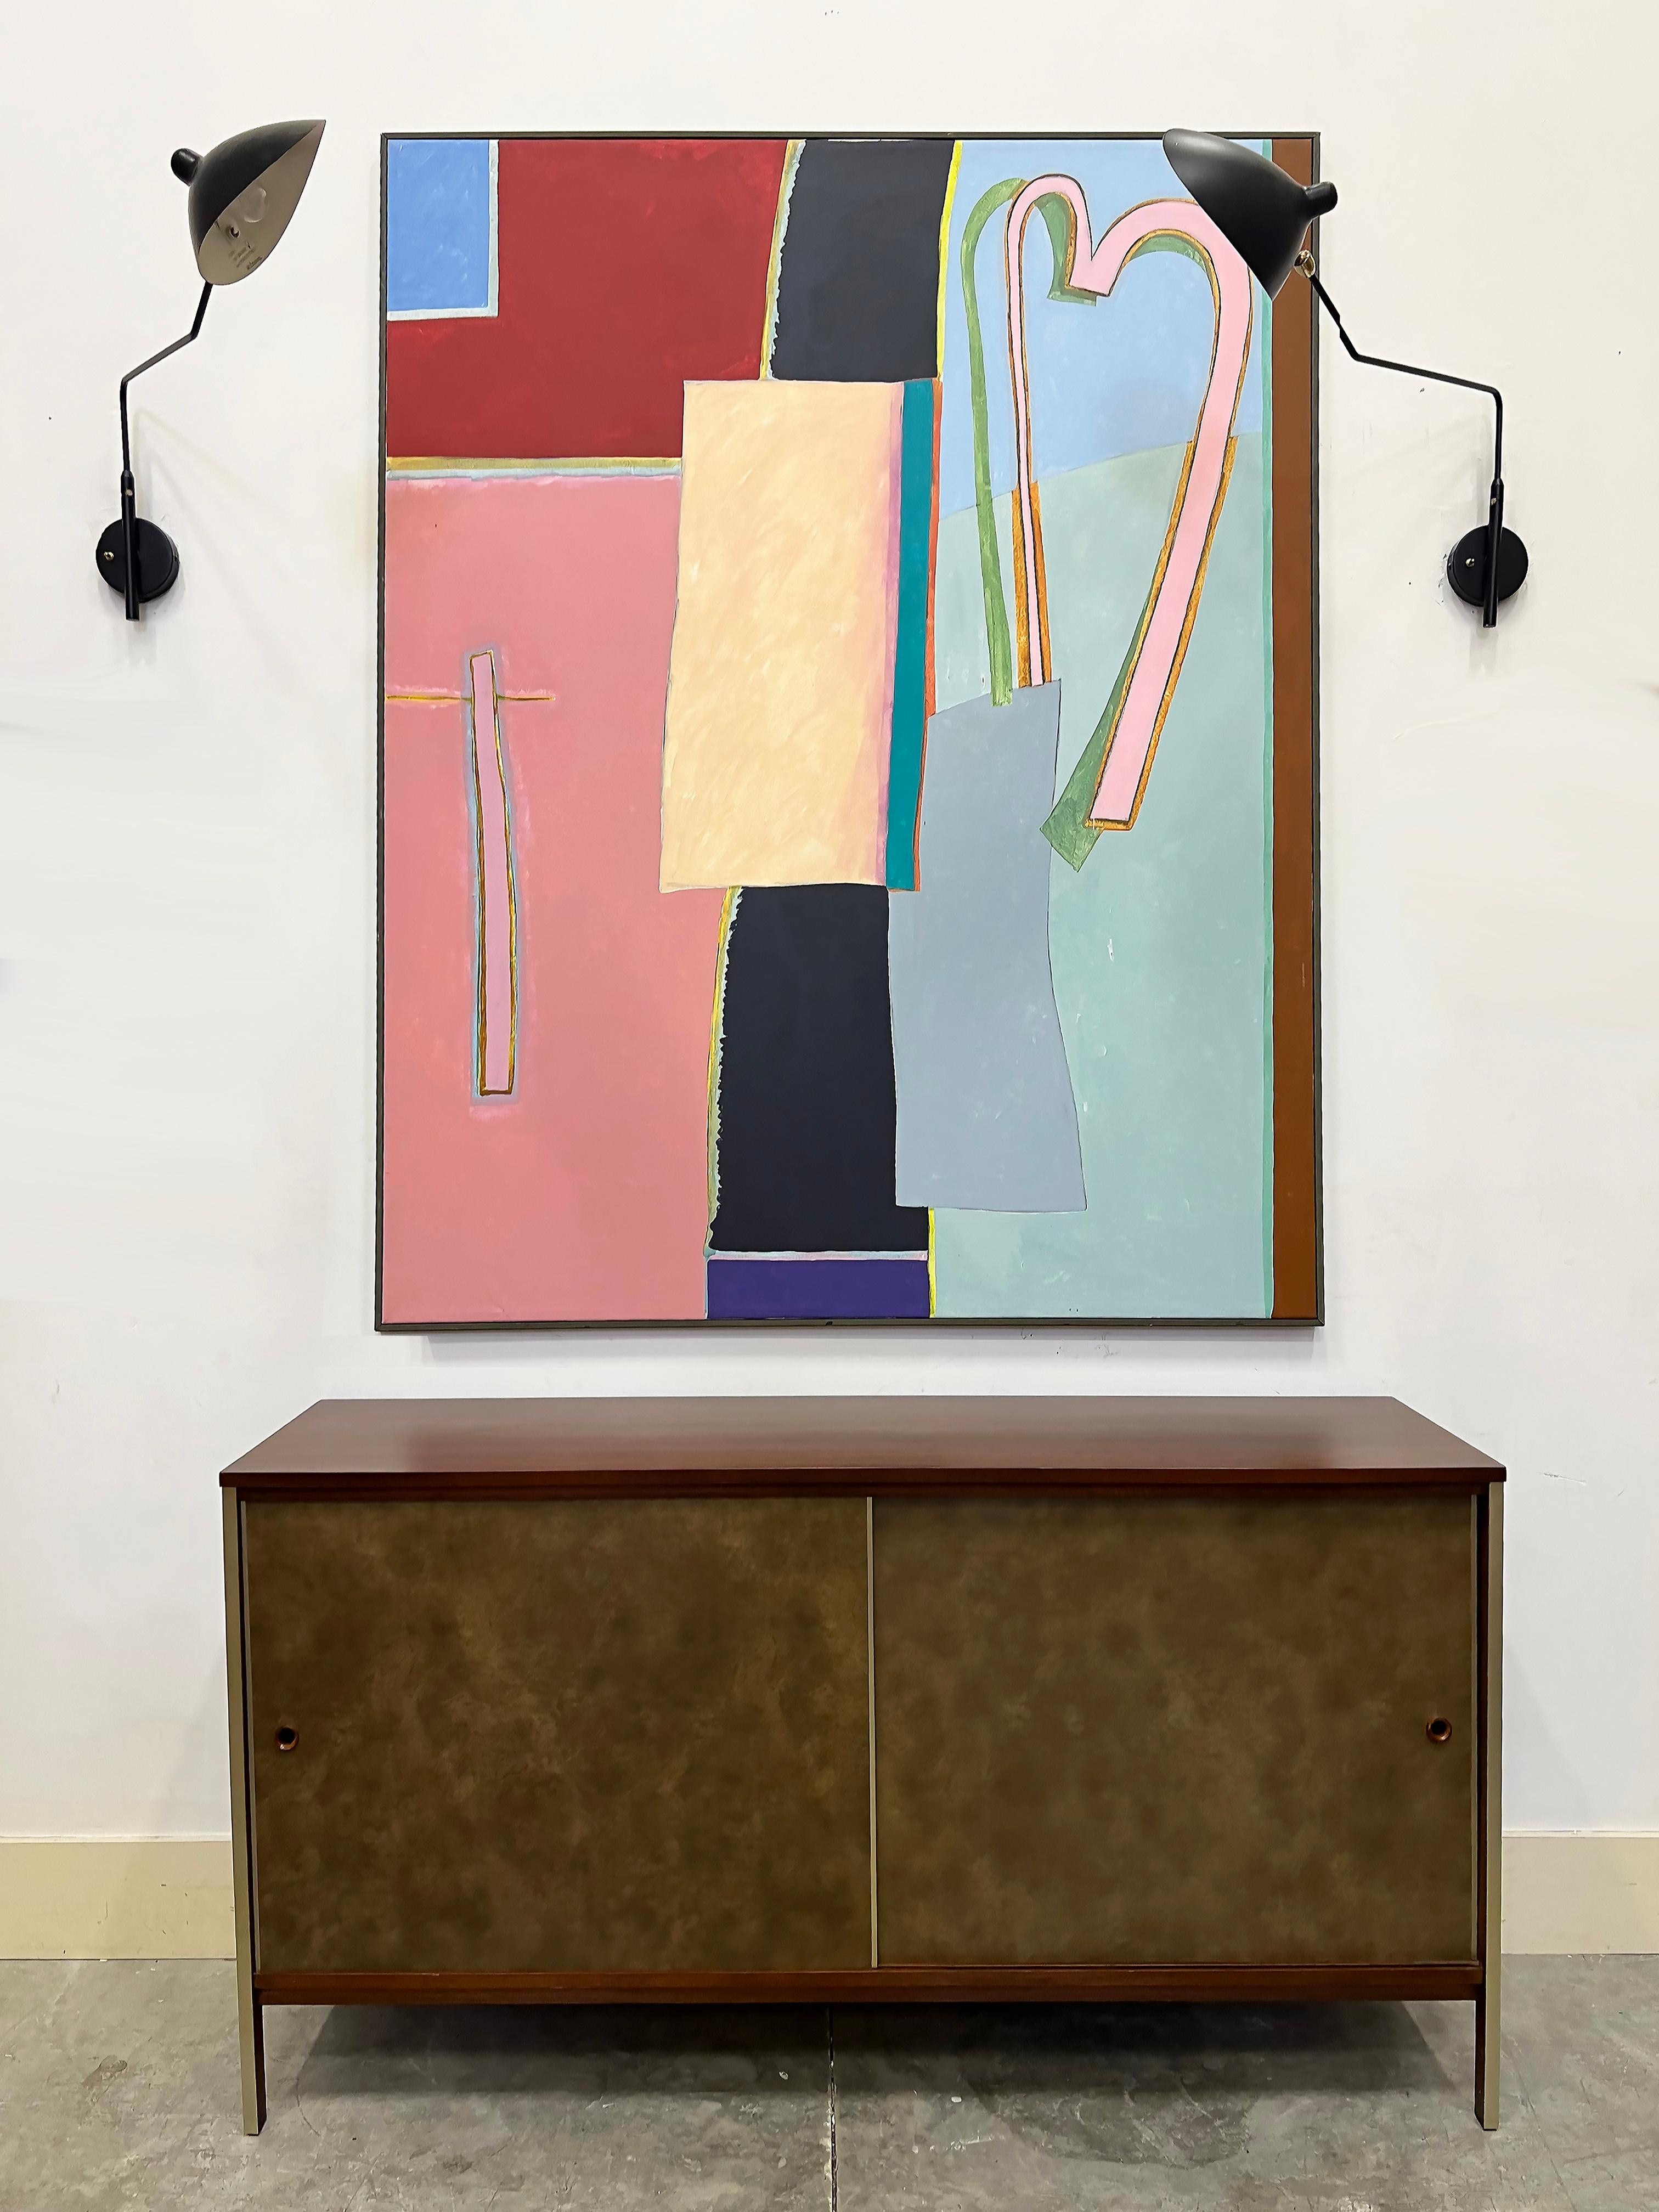 Monumental 1980s Abstract Painting by Harley Francis

Offered for sale is a monumental 1980s abstract painting by the American artist Harley Francis (1940s-2017). Francis has rapidly become a much sought-after artist since his death in 2017. The